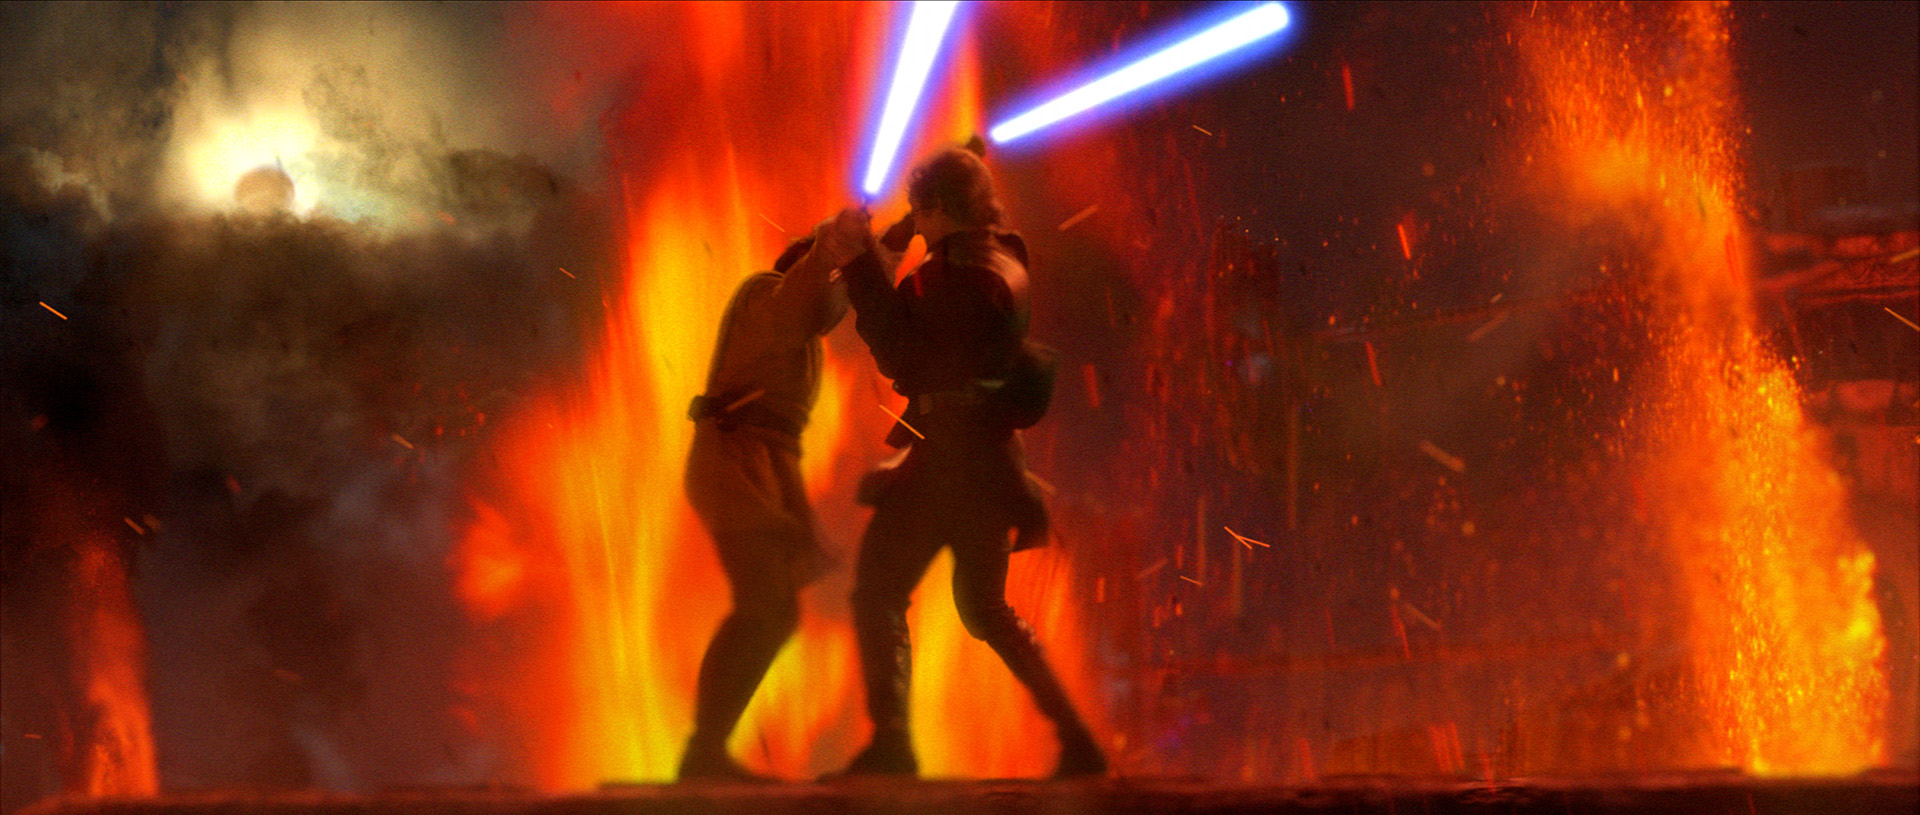 star-wars-episode-3-revenge-of-the-sith-lucasfilm